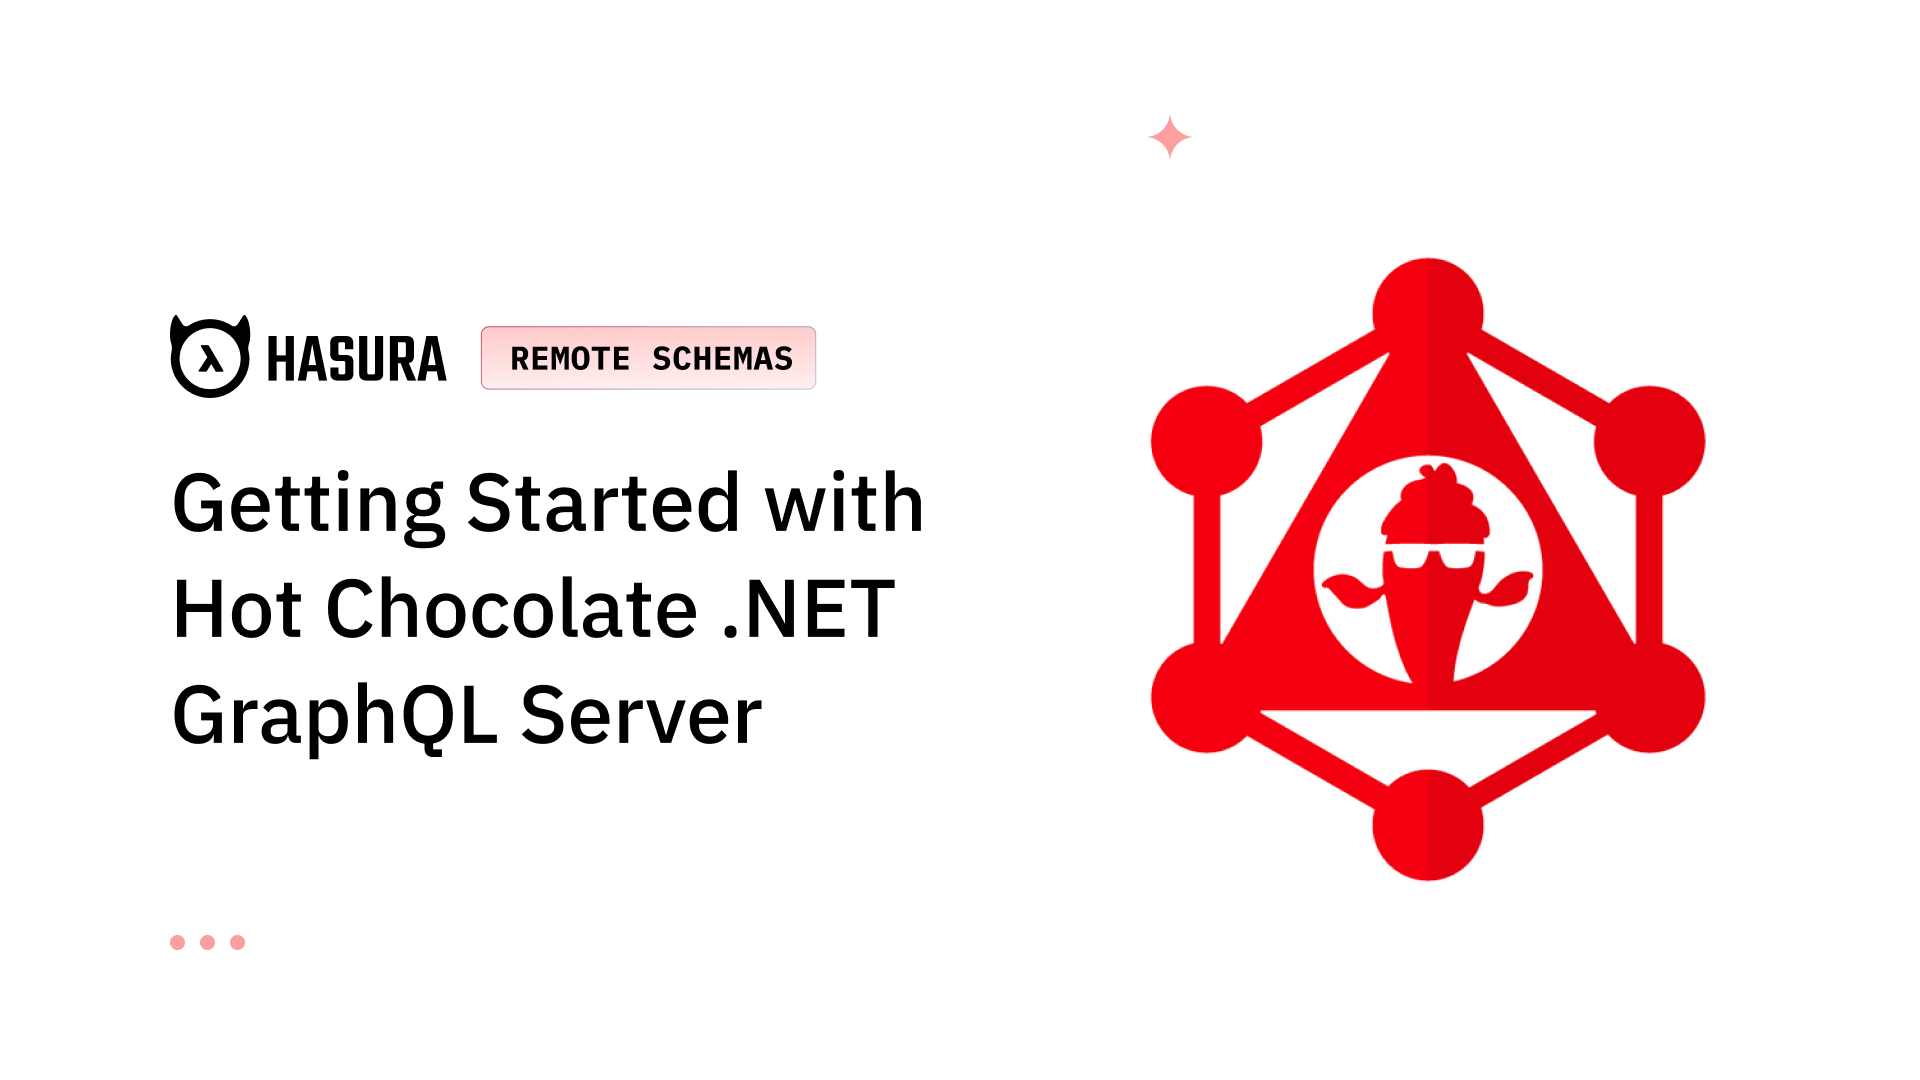 Getting Started with Hot Chocolate .NET GraphQL Server